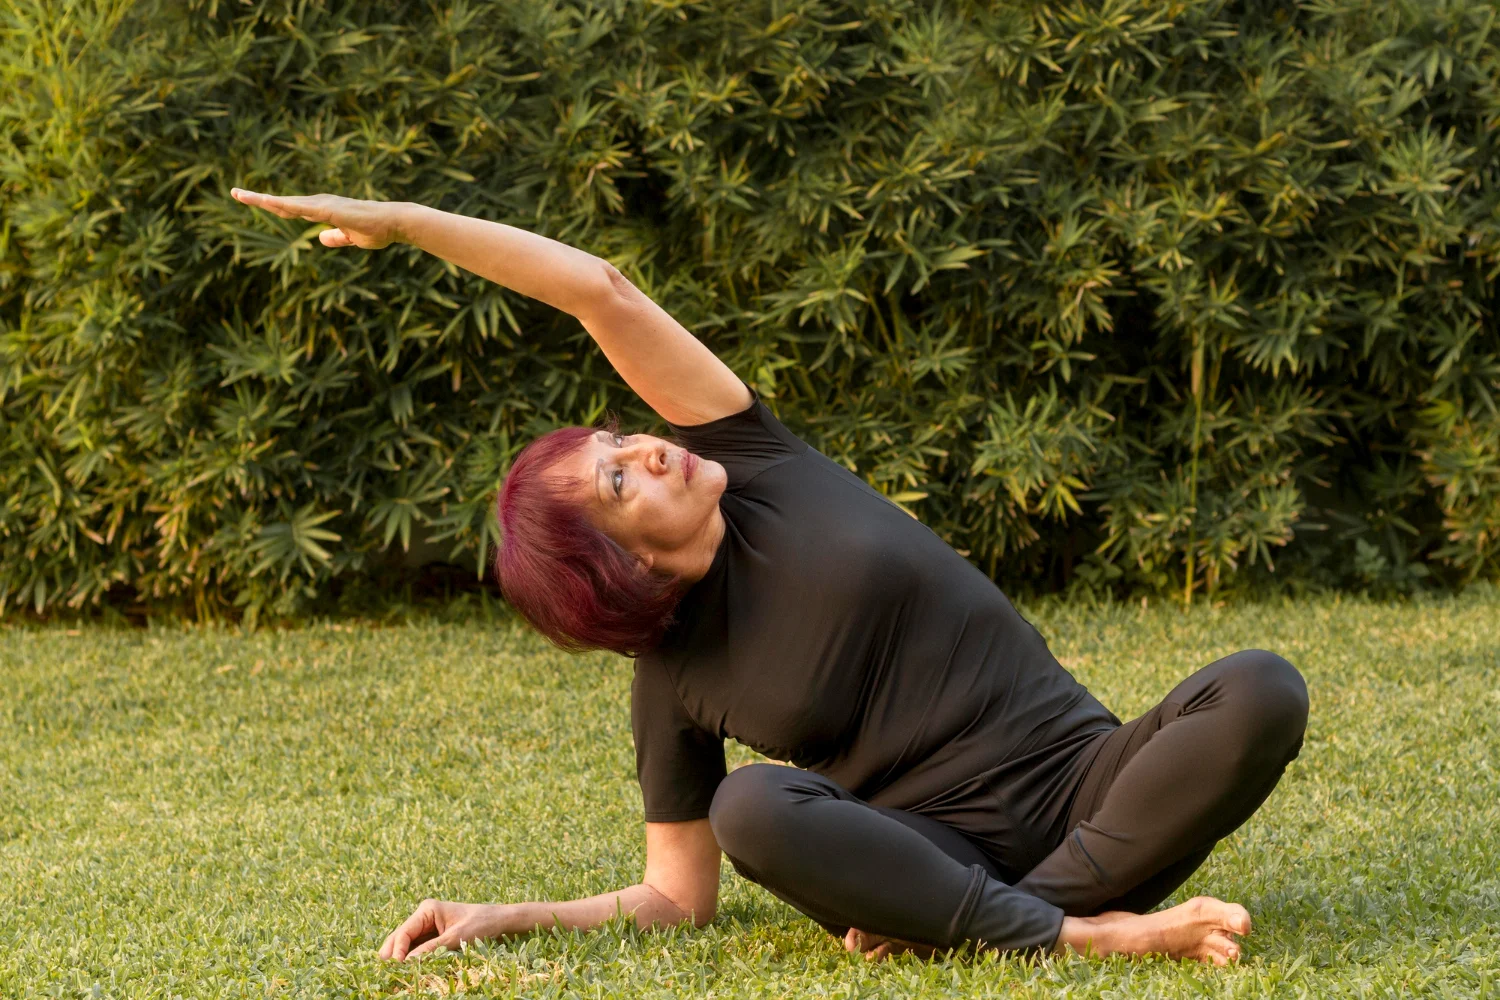 The elderly woman is seated on the grass, dressed in a black outfit as she extends her hands above her head, gently stretching to one side while practicing yoga